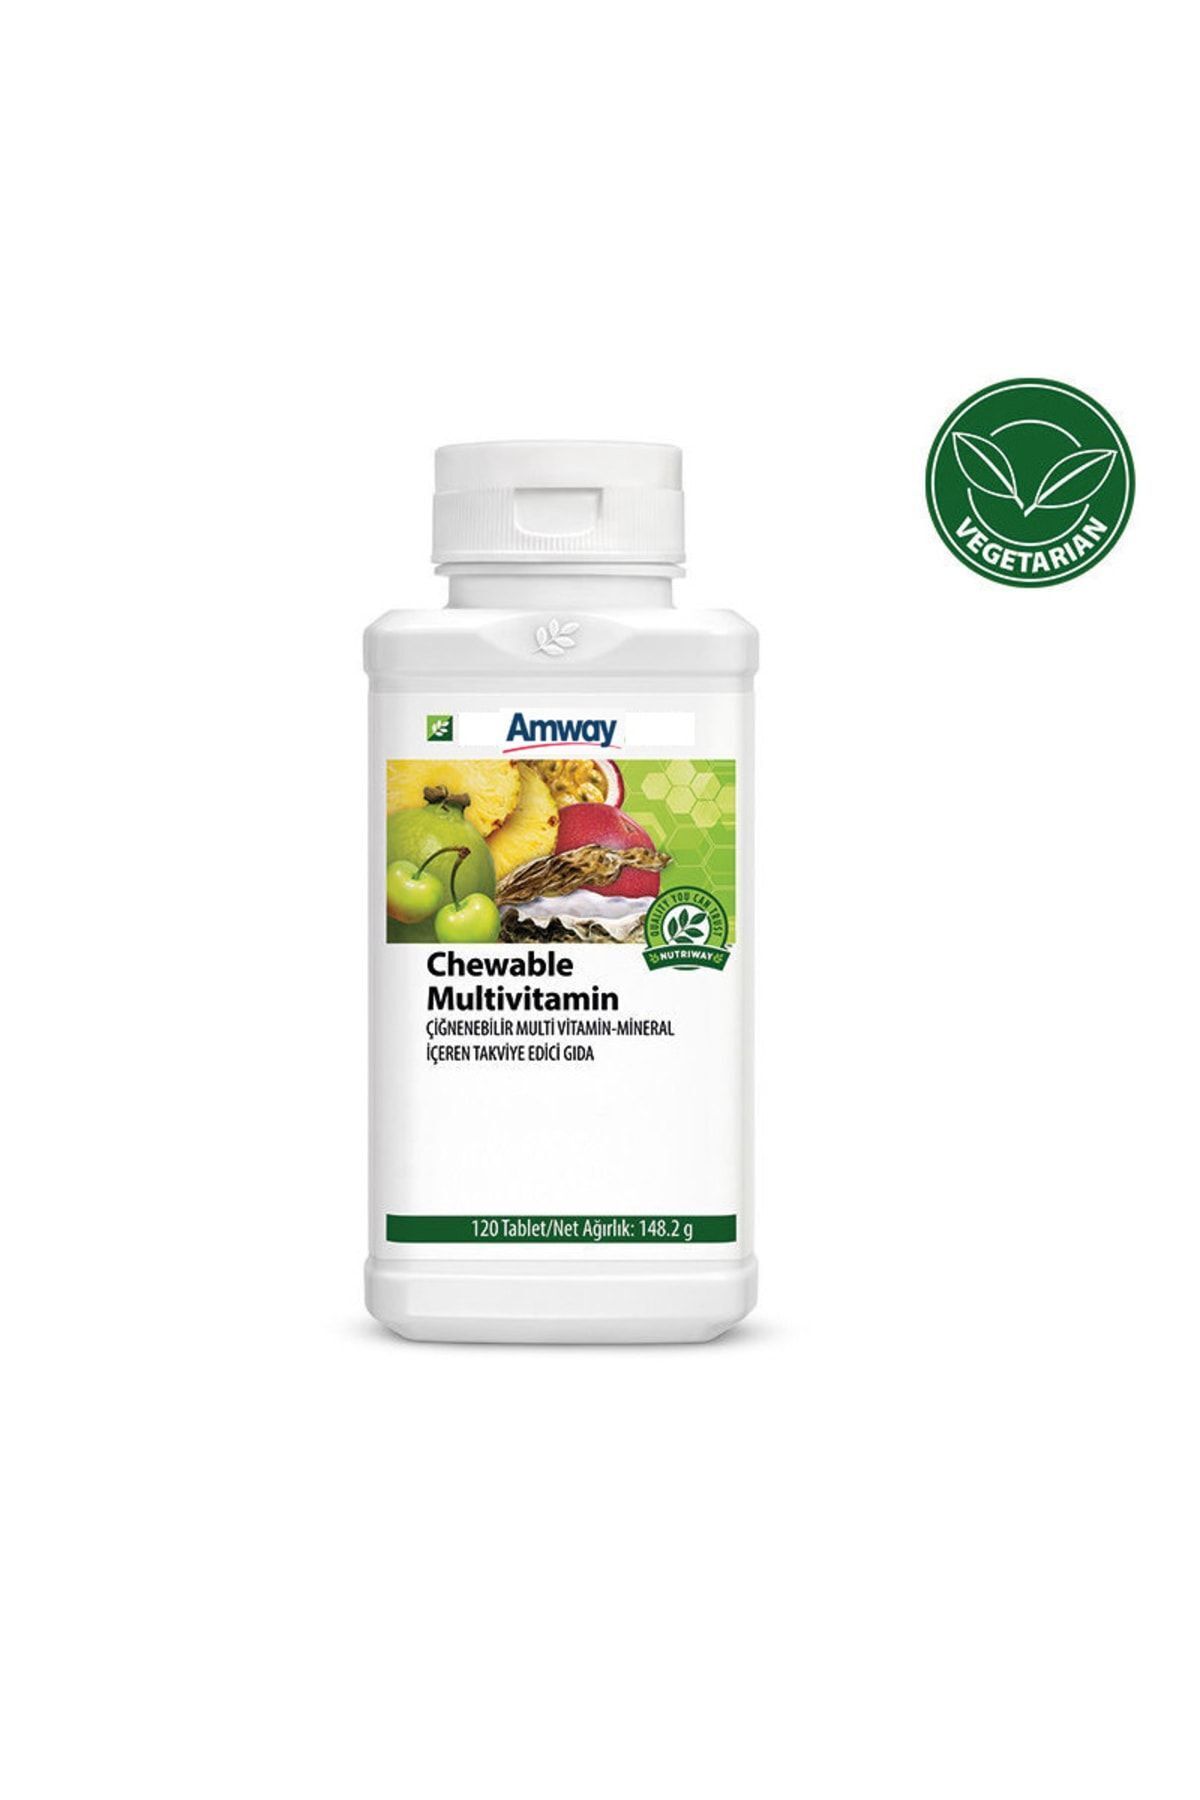 Amway Chewable Multivitamin 120 Tablet